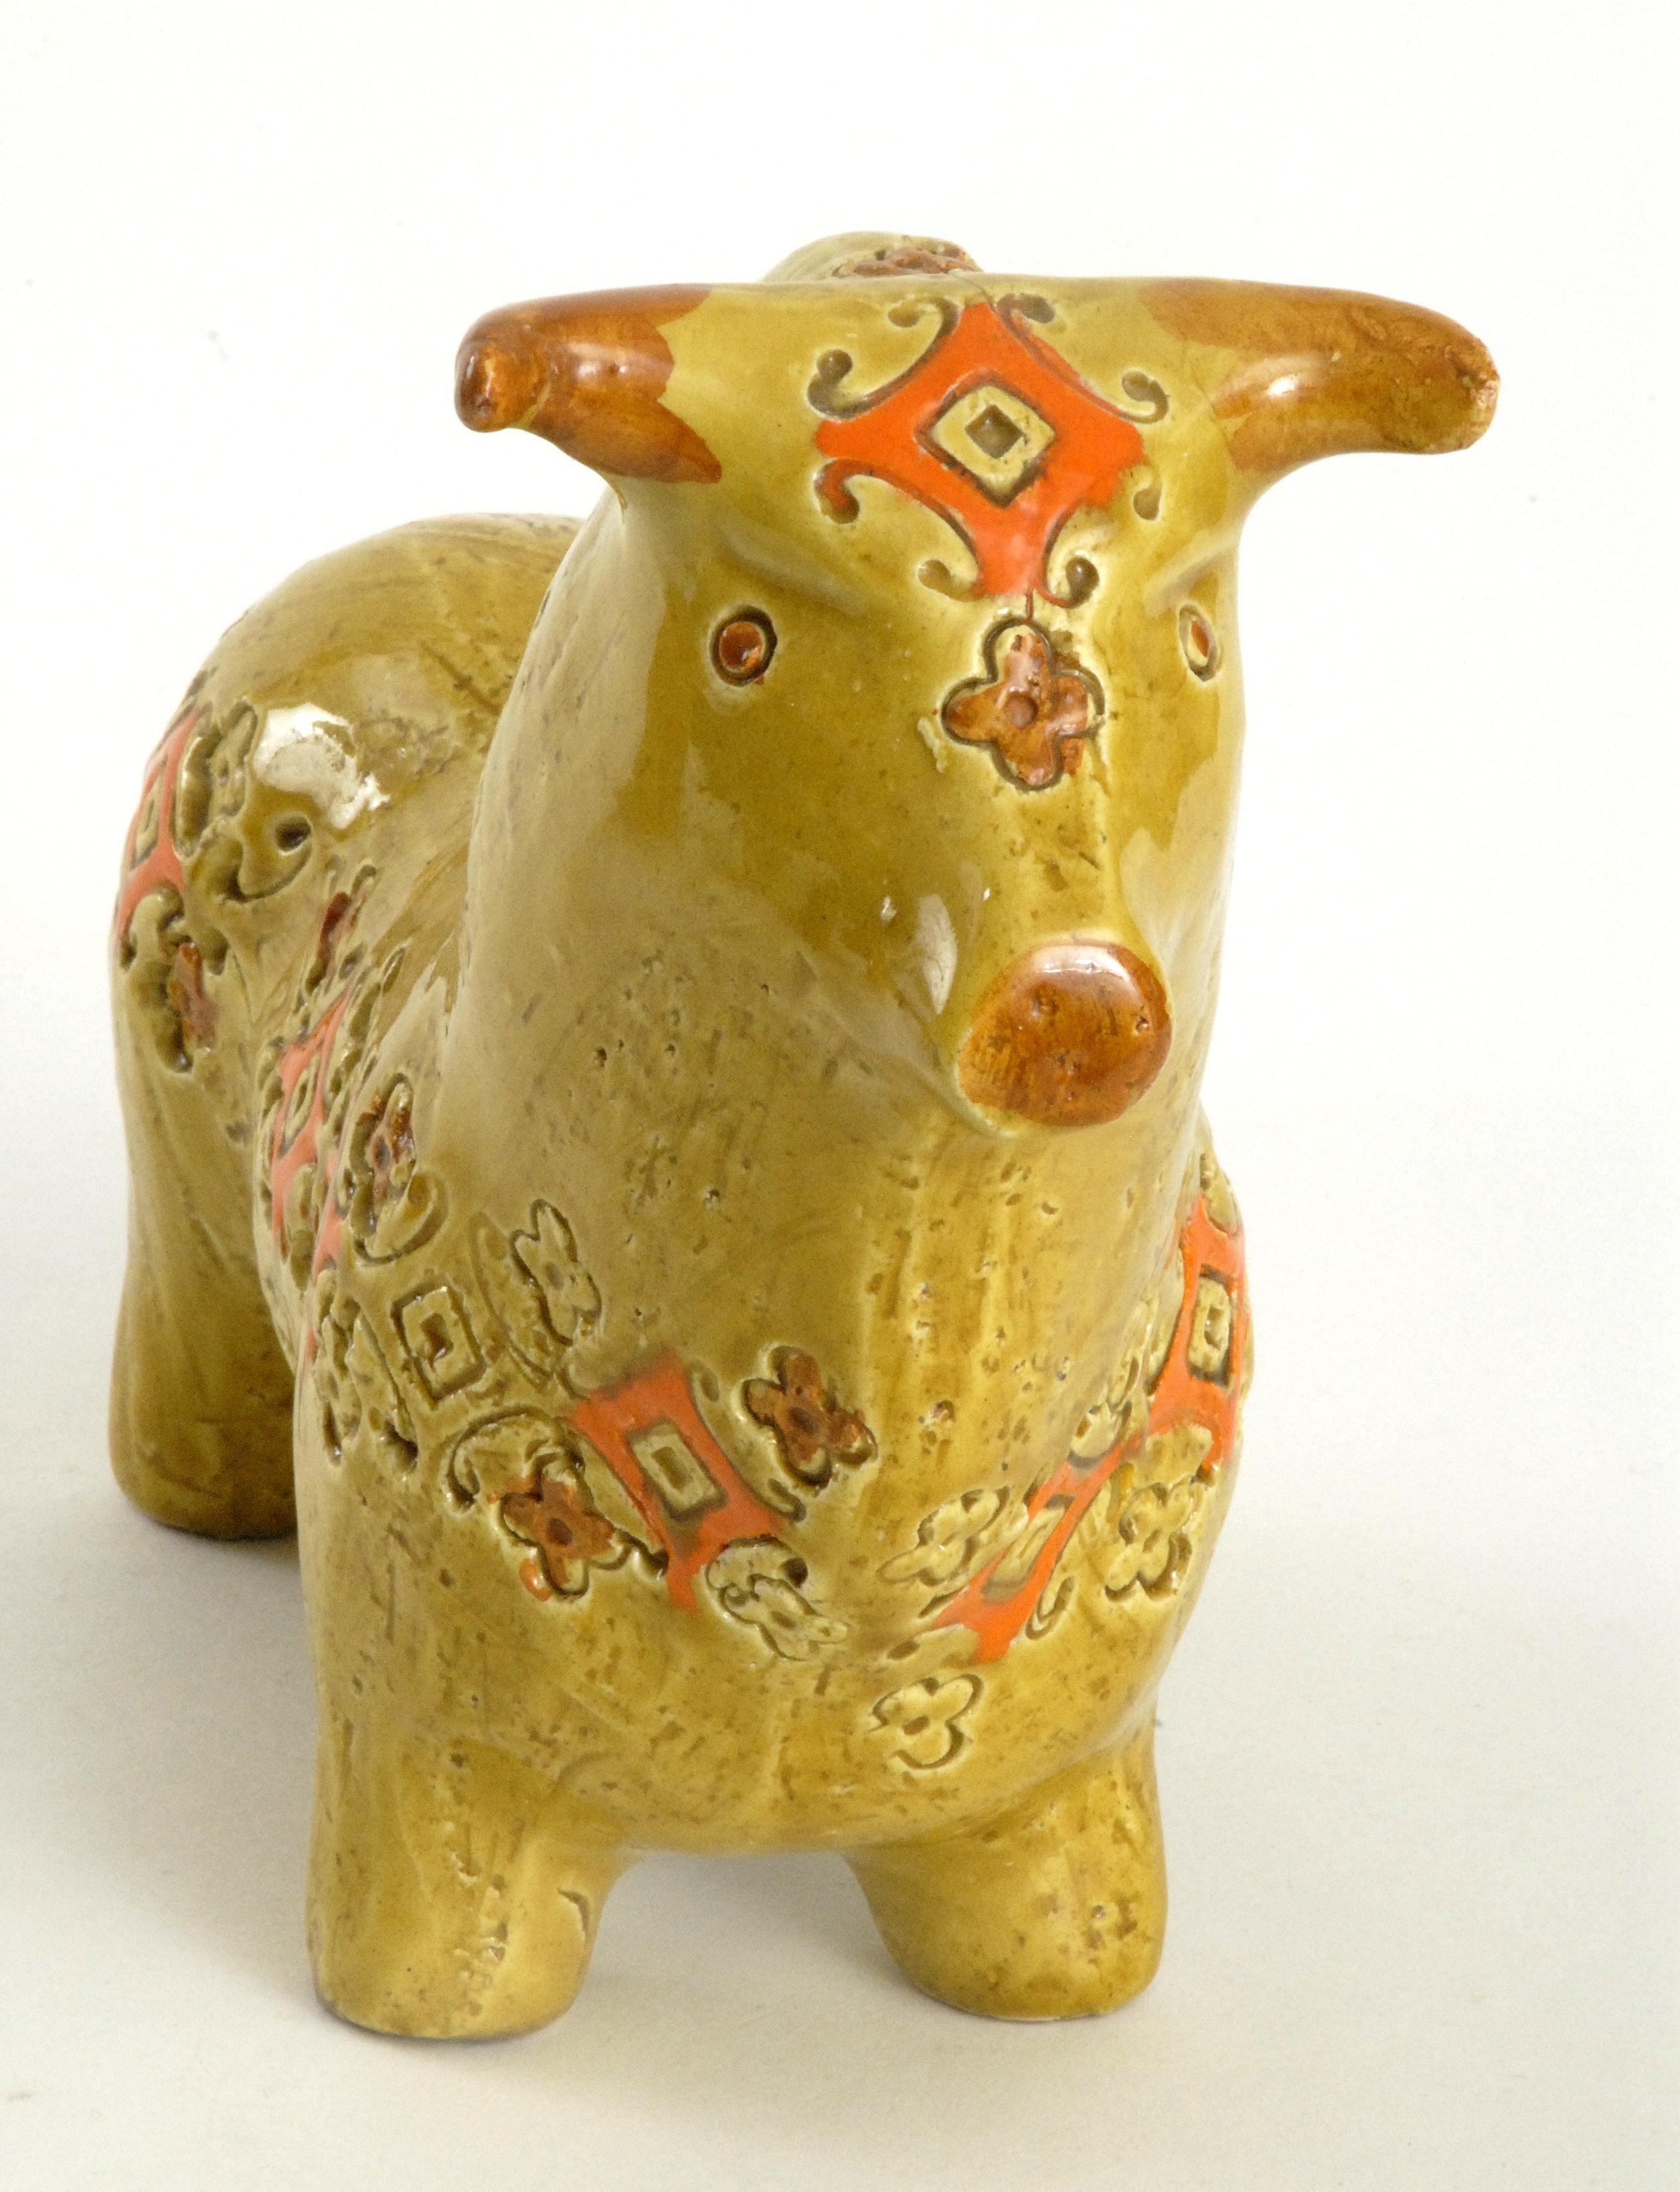 A large yellow ochre 'Spagnoli' pattern [Spanish] bull with orange highlights in the stamped pattern. Marked in black on the underside.